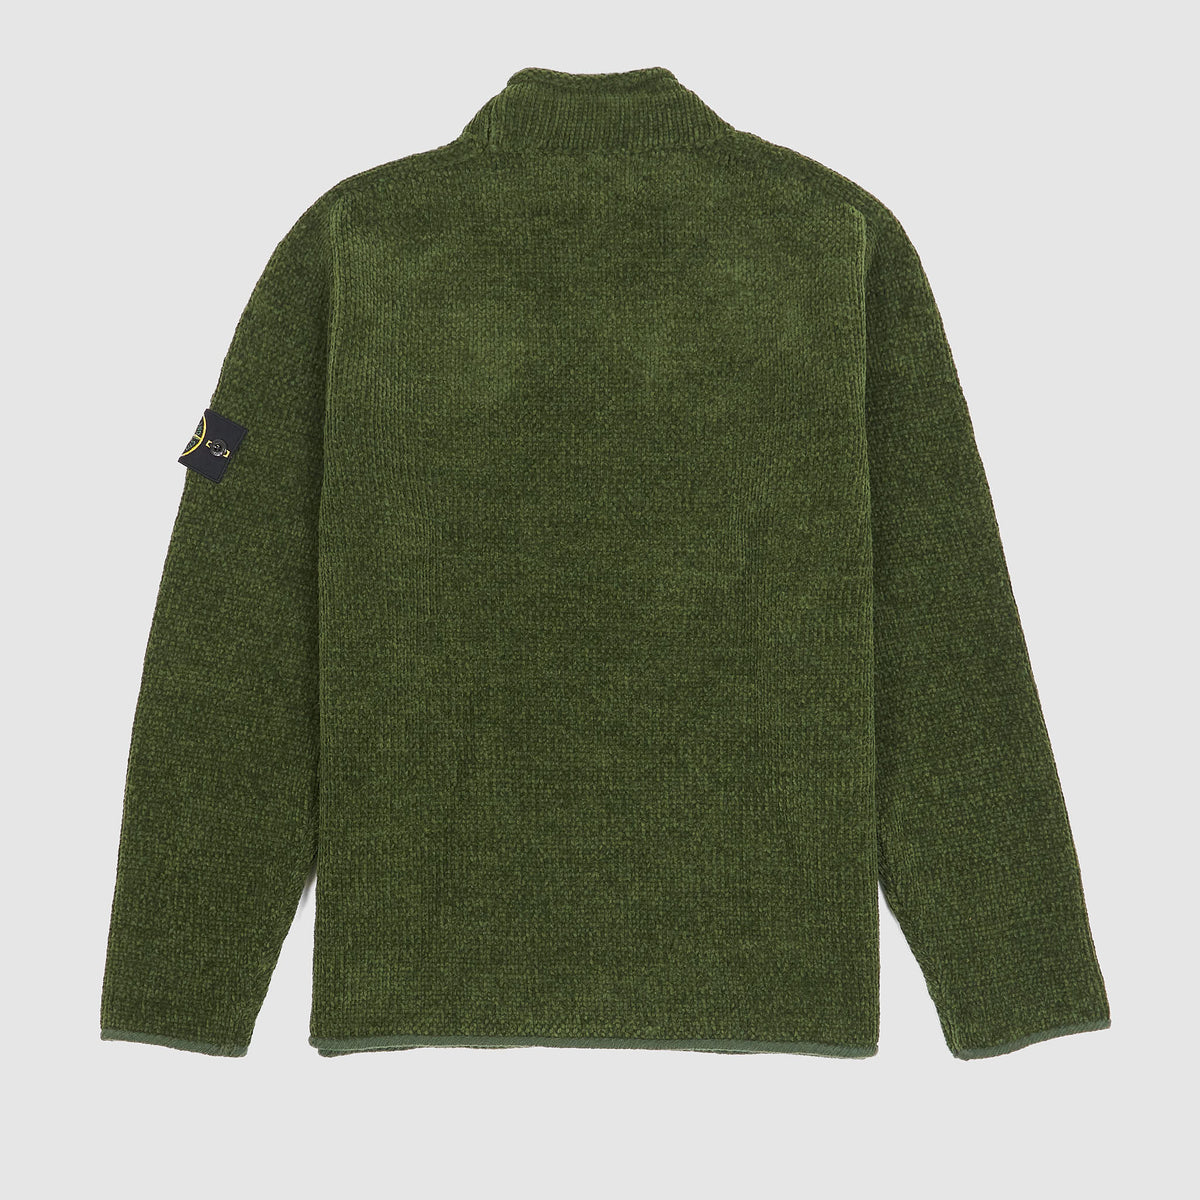 Stone Island Knitted Chenille Mock Neck Pullover